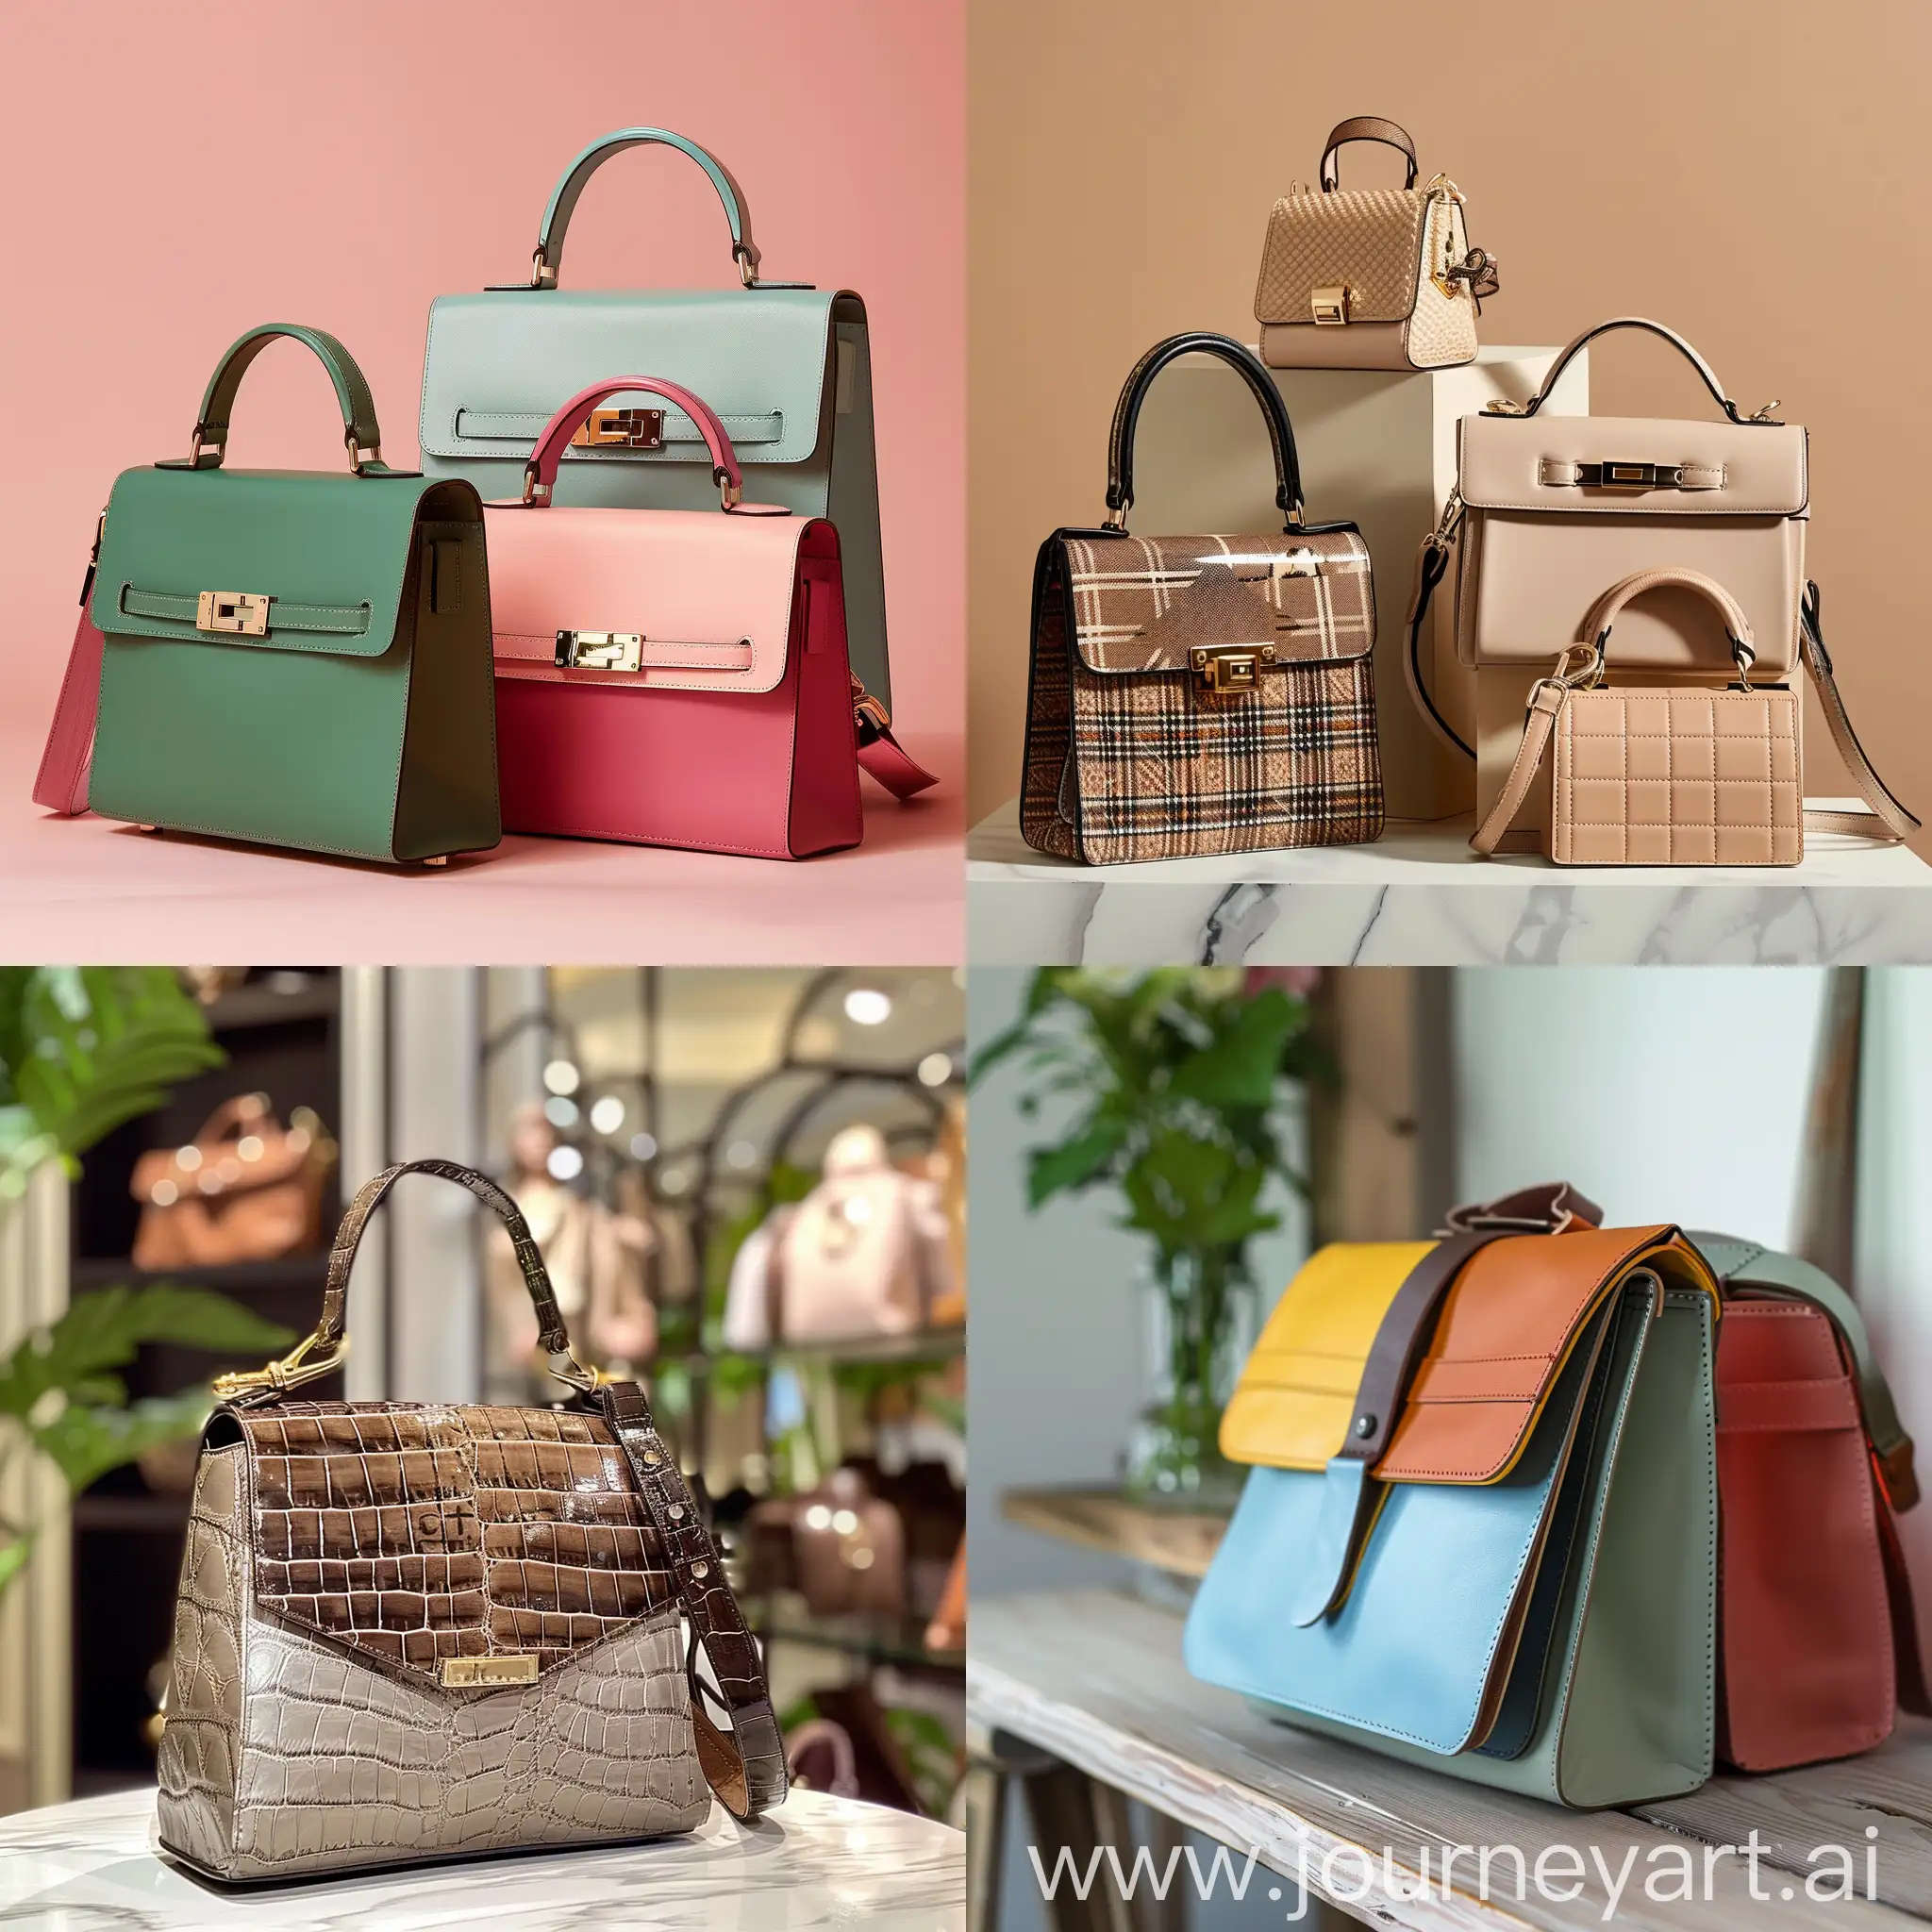 Colorful-Bags-and-Accessories-Displayed-in-Vibrant-Setting